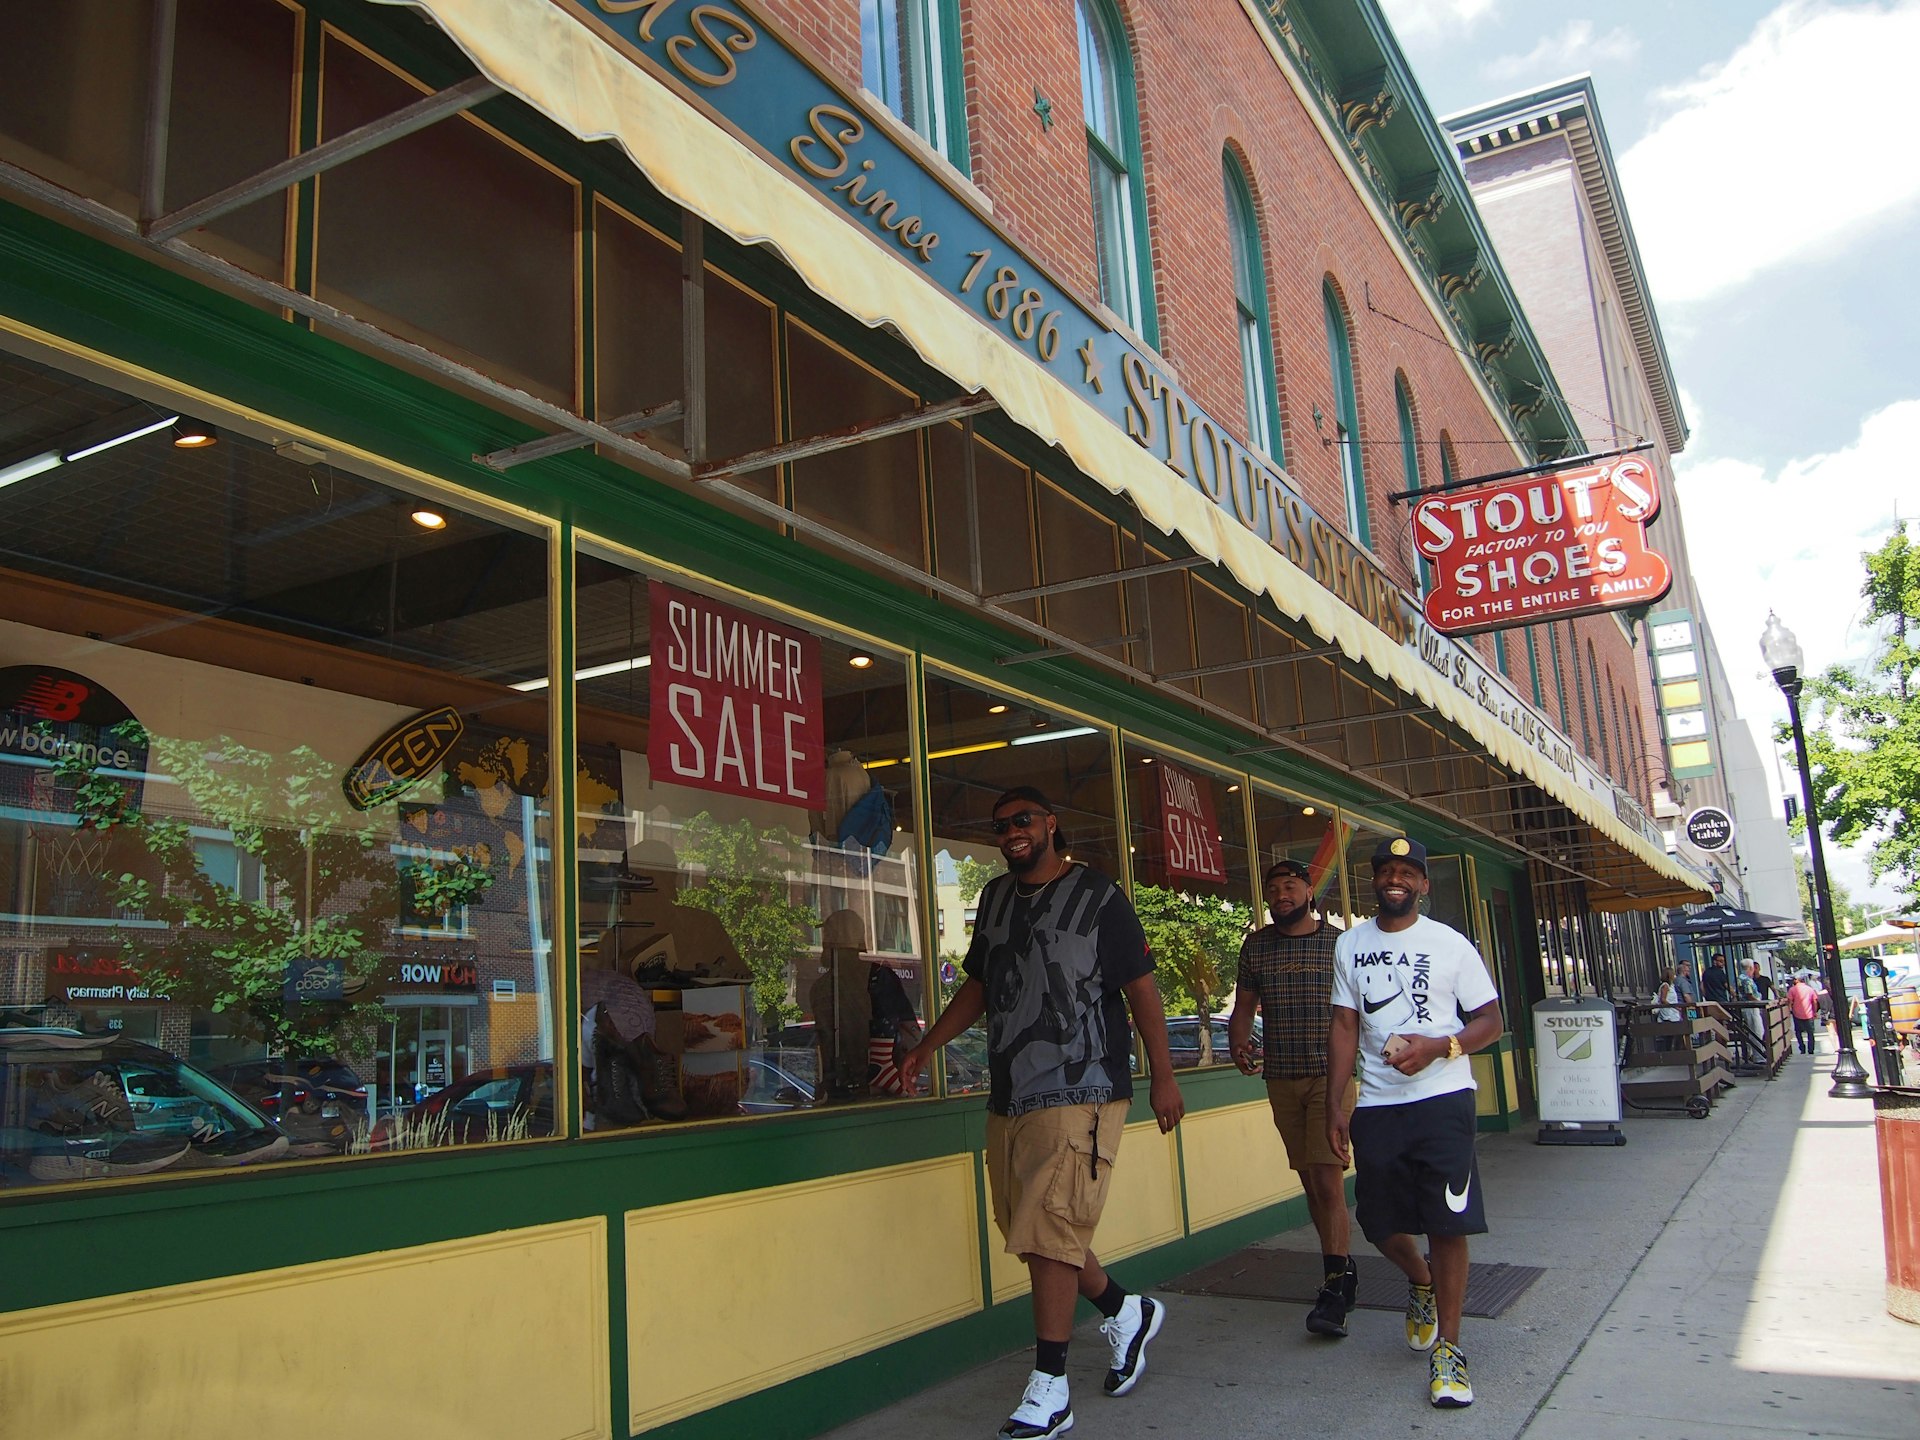 People strolling past the famous Stout's Shoe Store located along Mass Ave, one of the six designated cultural districts in Indianapolis, Indiana, USA